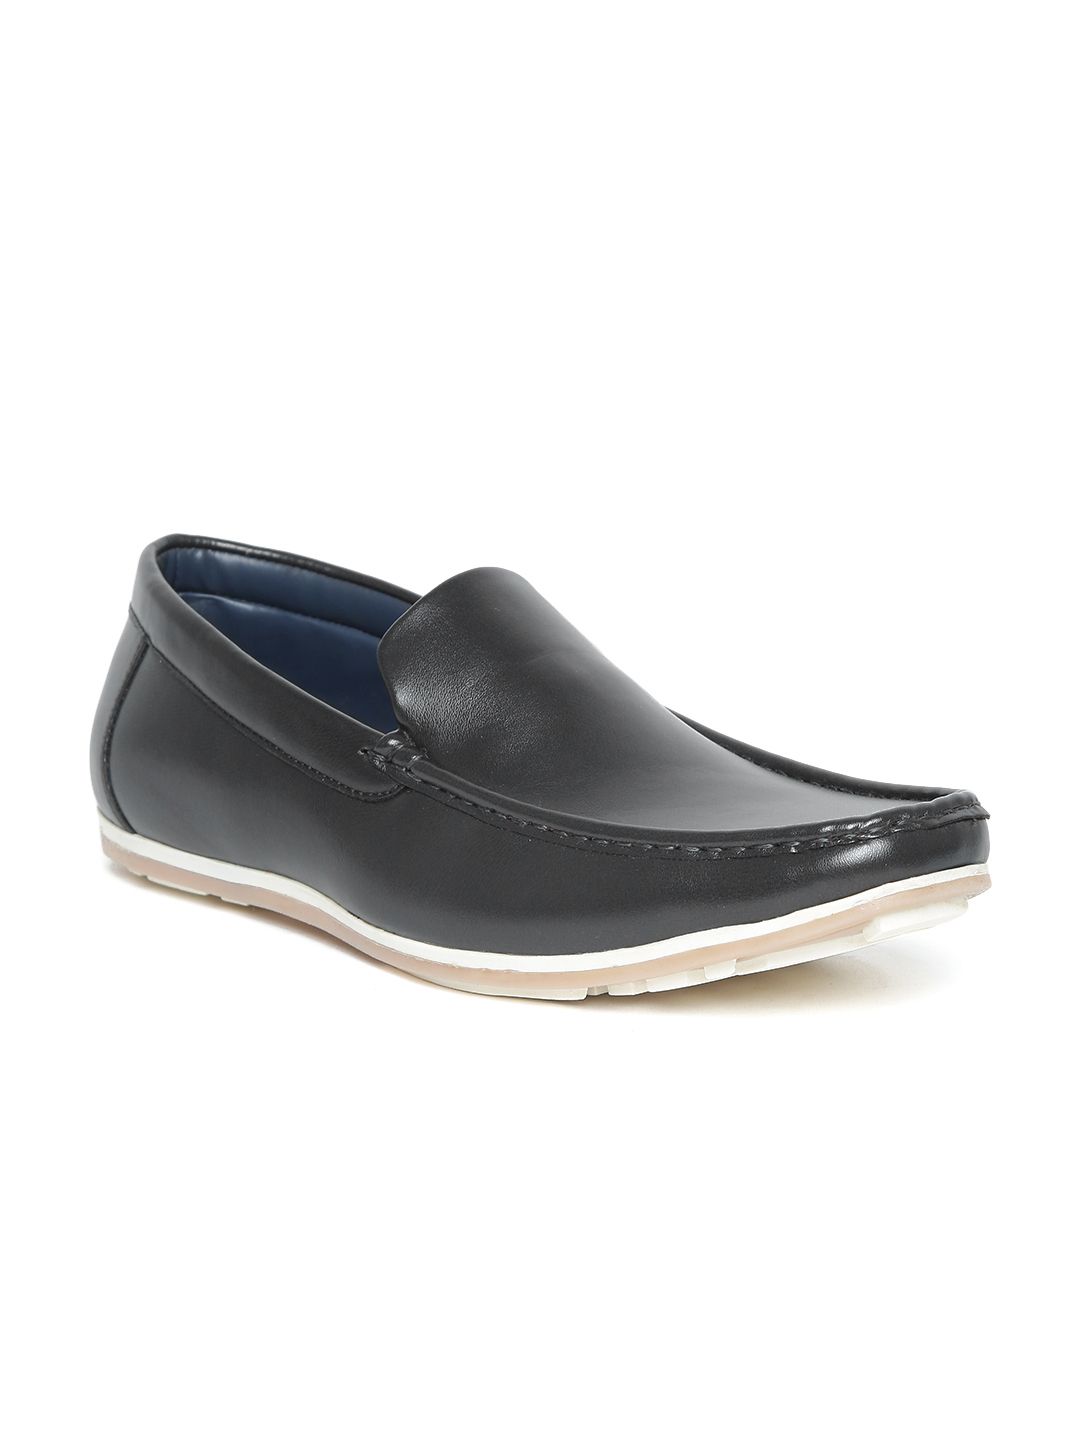 Bata Docie Ii Black Loafers for Men online in India at Best price on ...